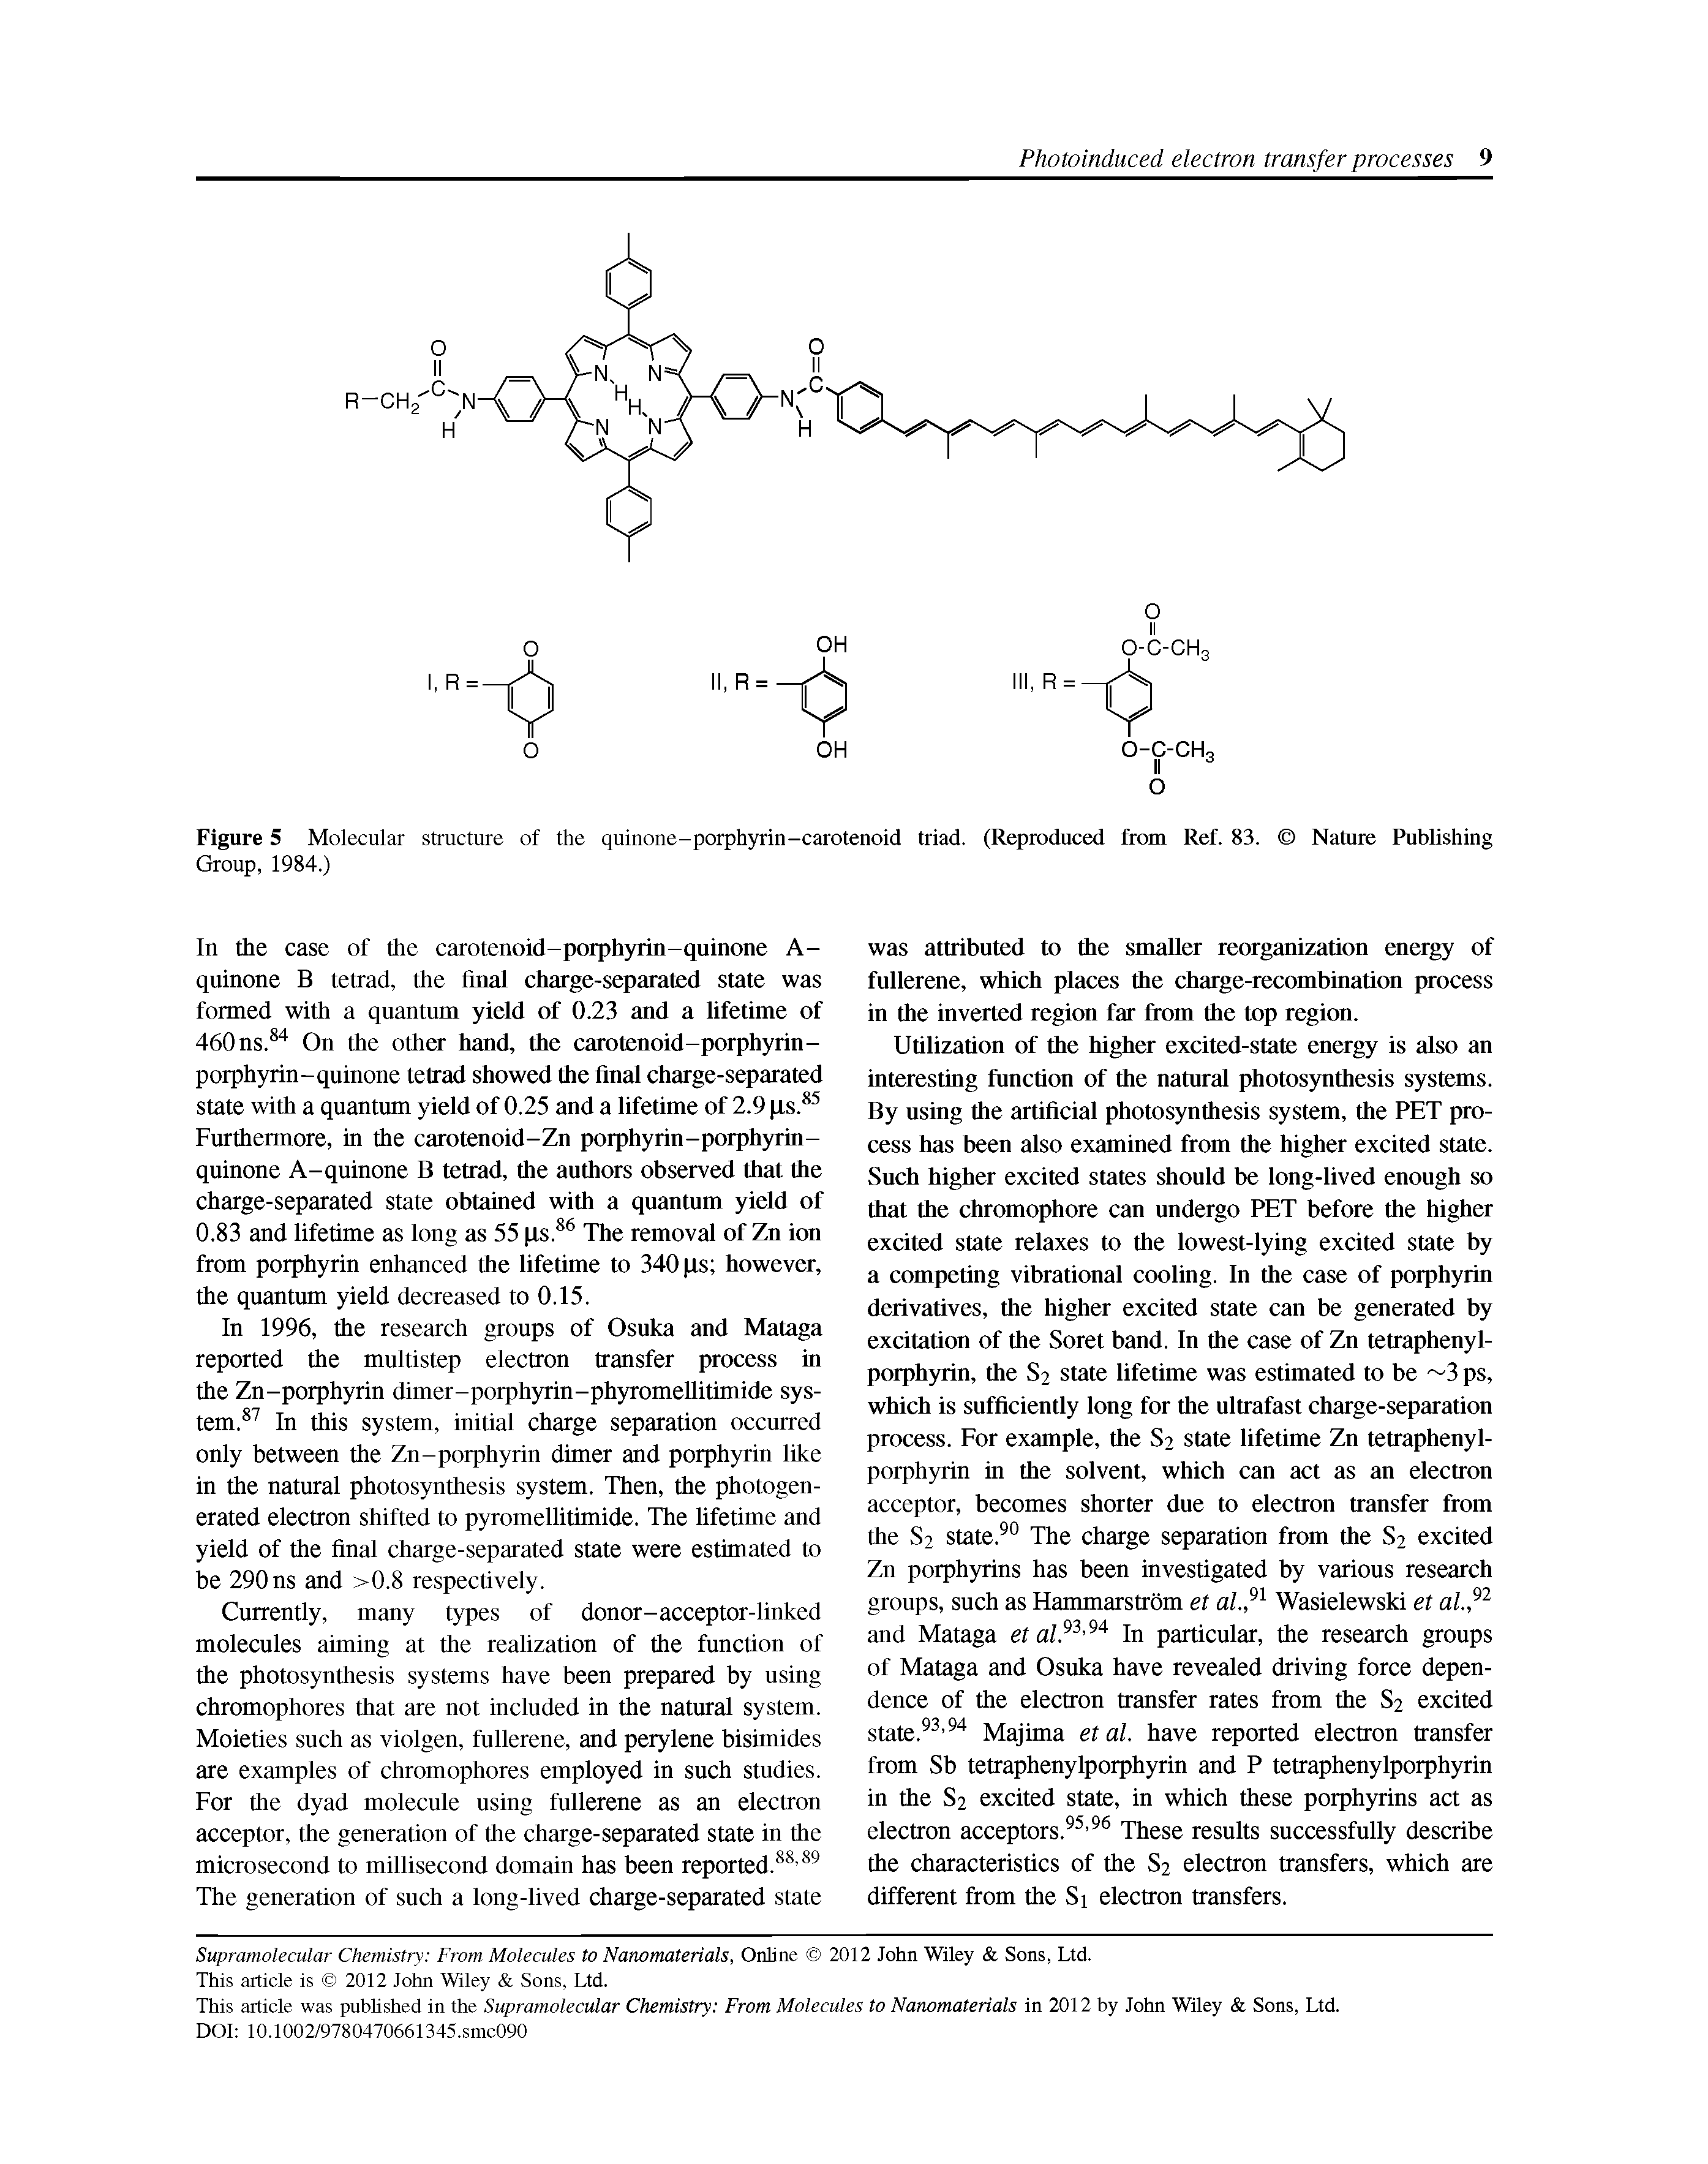 Figure 5 Molecular structure of the quinone-porphyrin-carotenoid triad. (Reproduced from Ref. 83. Nature Publishing Group, 1984.)...